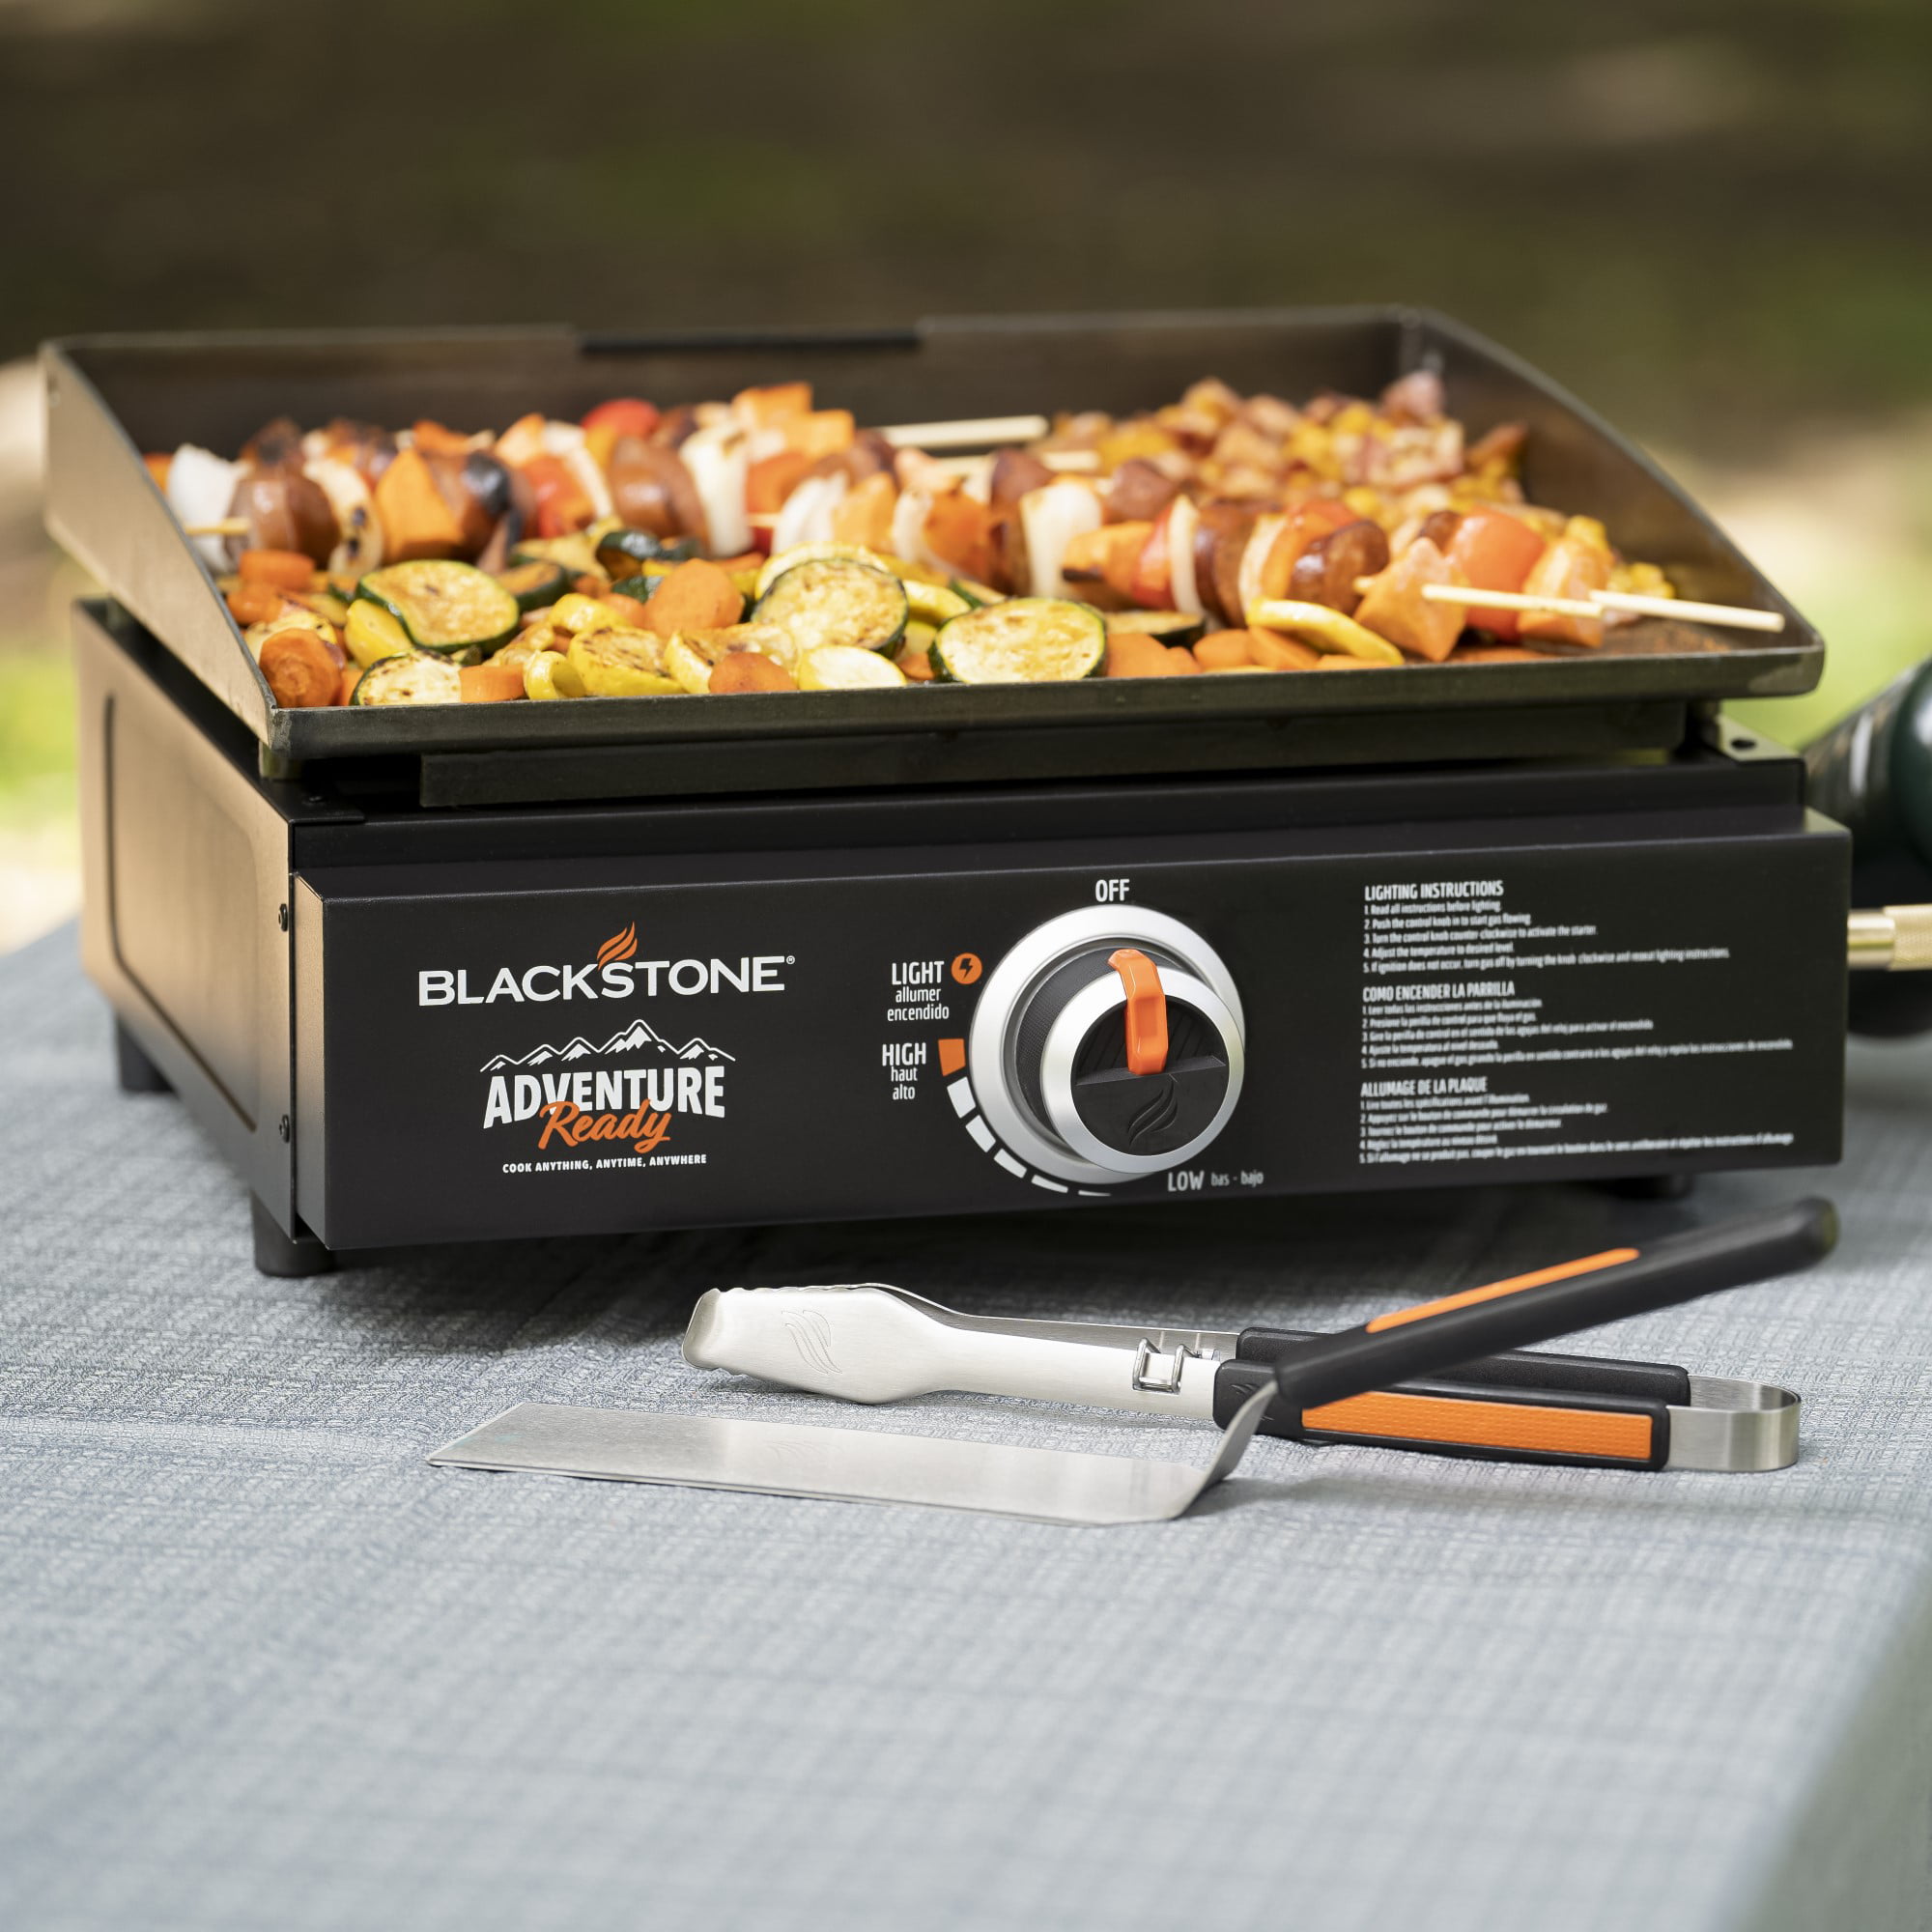 Blackstone 17" Adventure Ready Tabletop Outdoor Griddle w\ Grease Management 